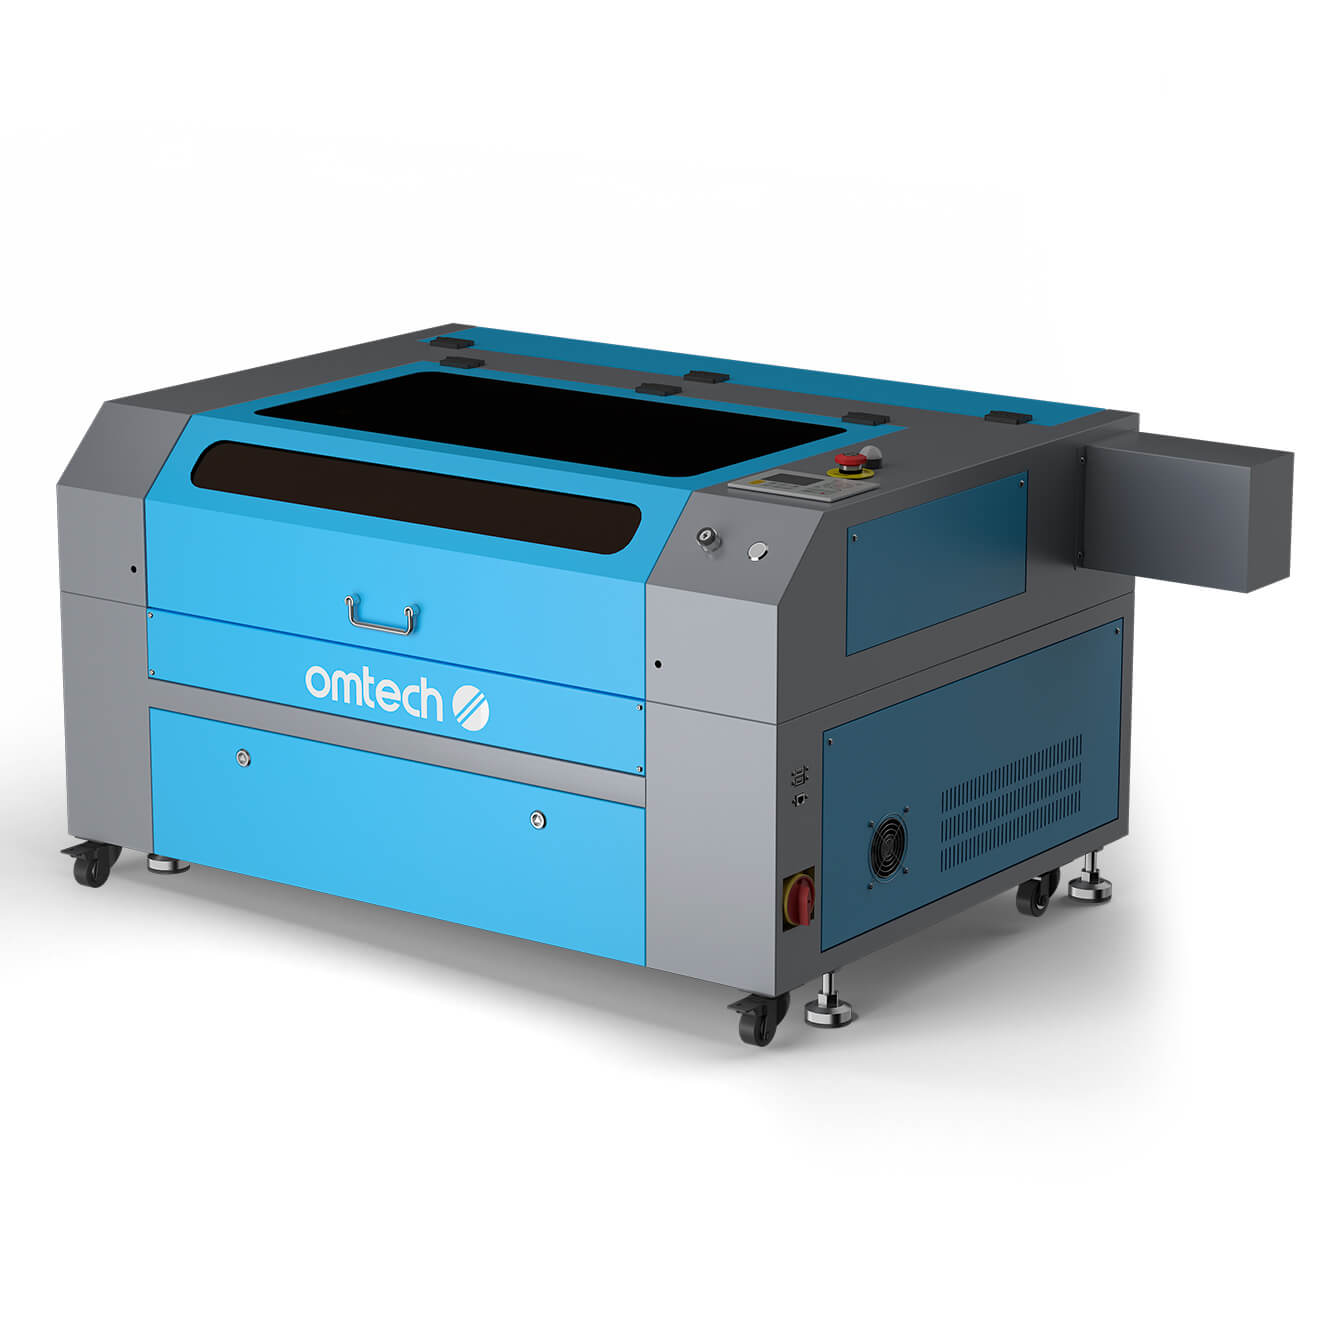 80W CO2 Laser Engraving Machine & Cutter with 700x500mm Engraving Area | Turbo-758